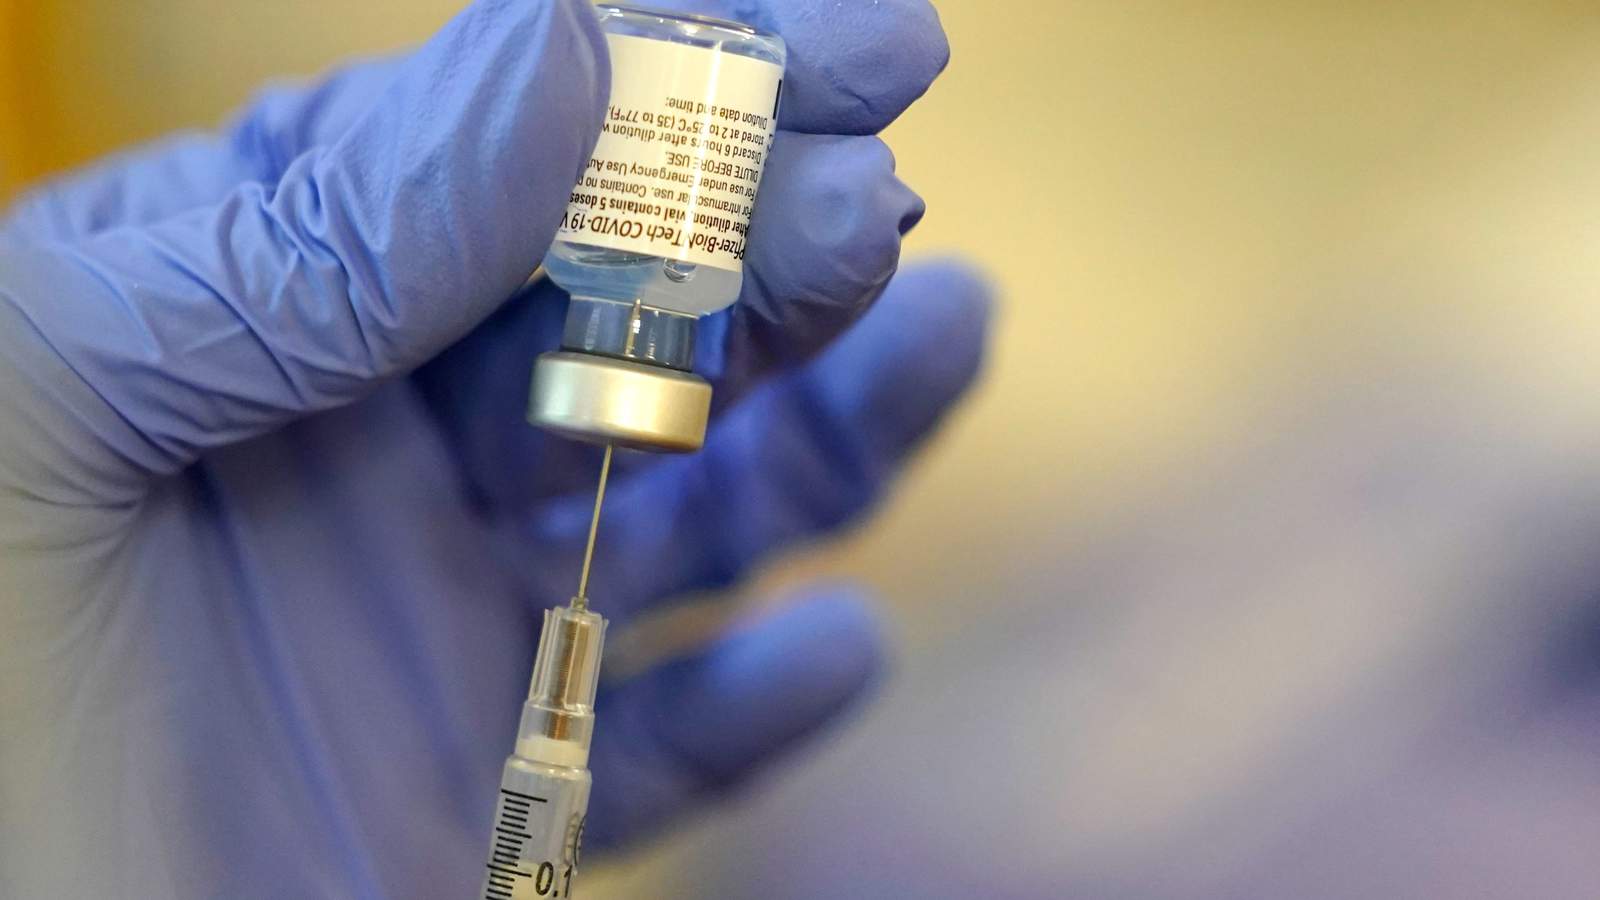 Jacksonville NAACP president outlines vaccine rollout concerns in letter to mayor